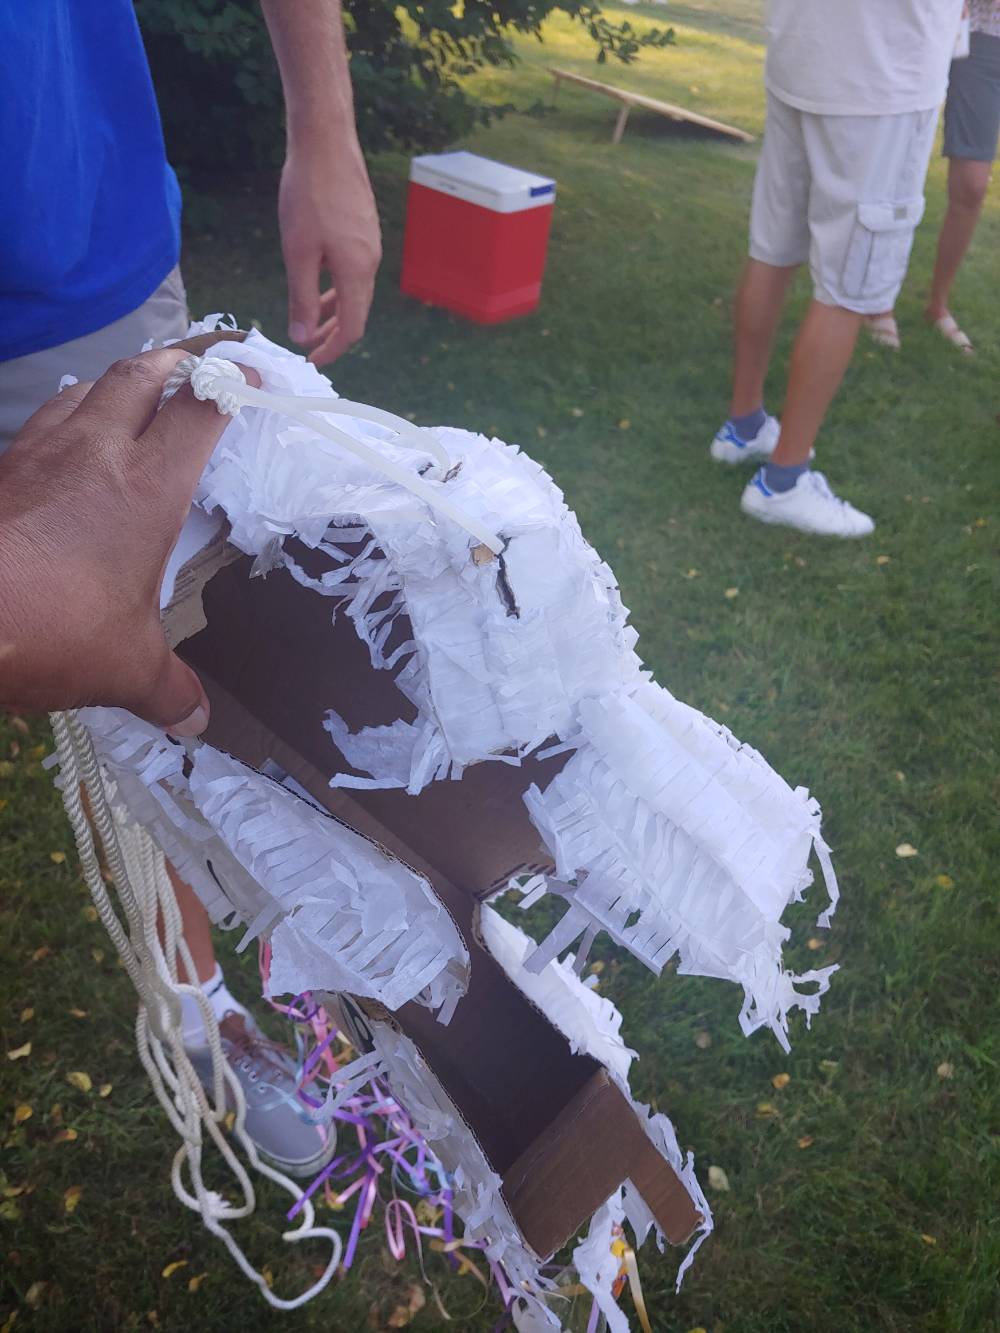 After the pinata was completely decimated